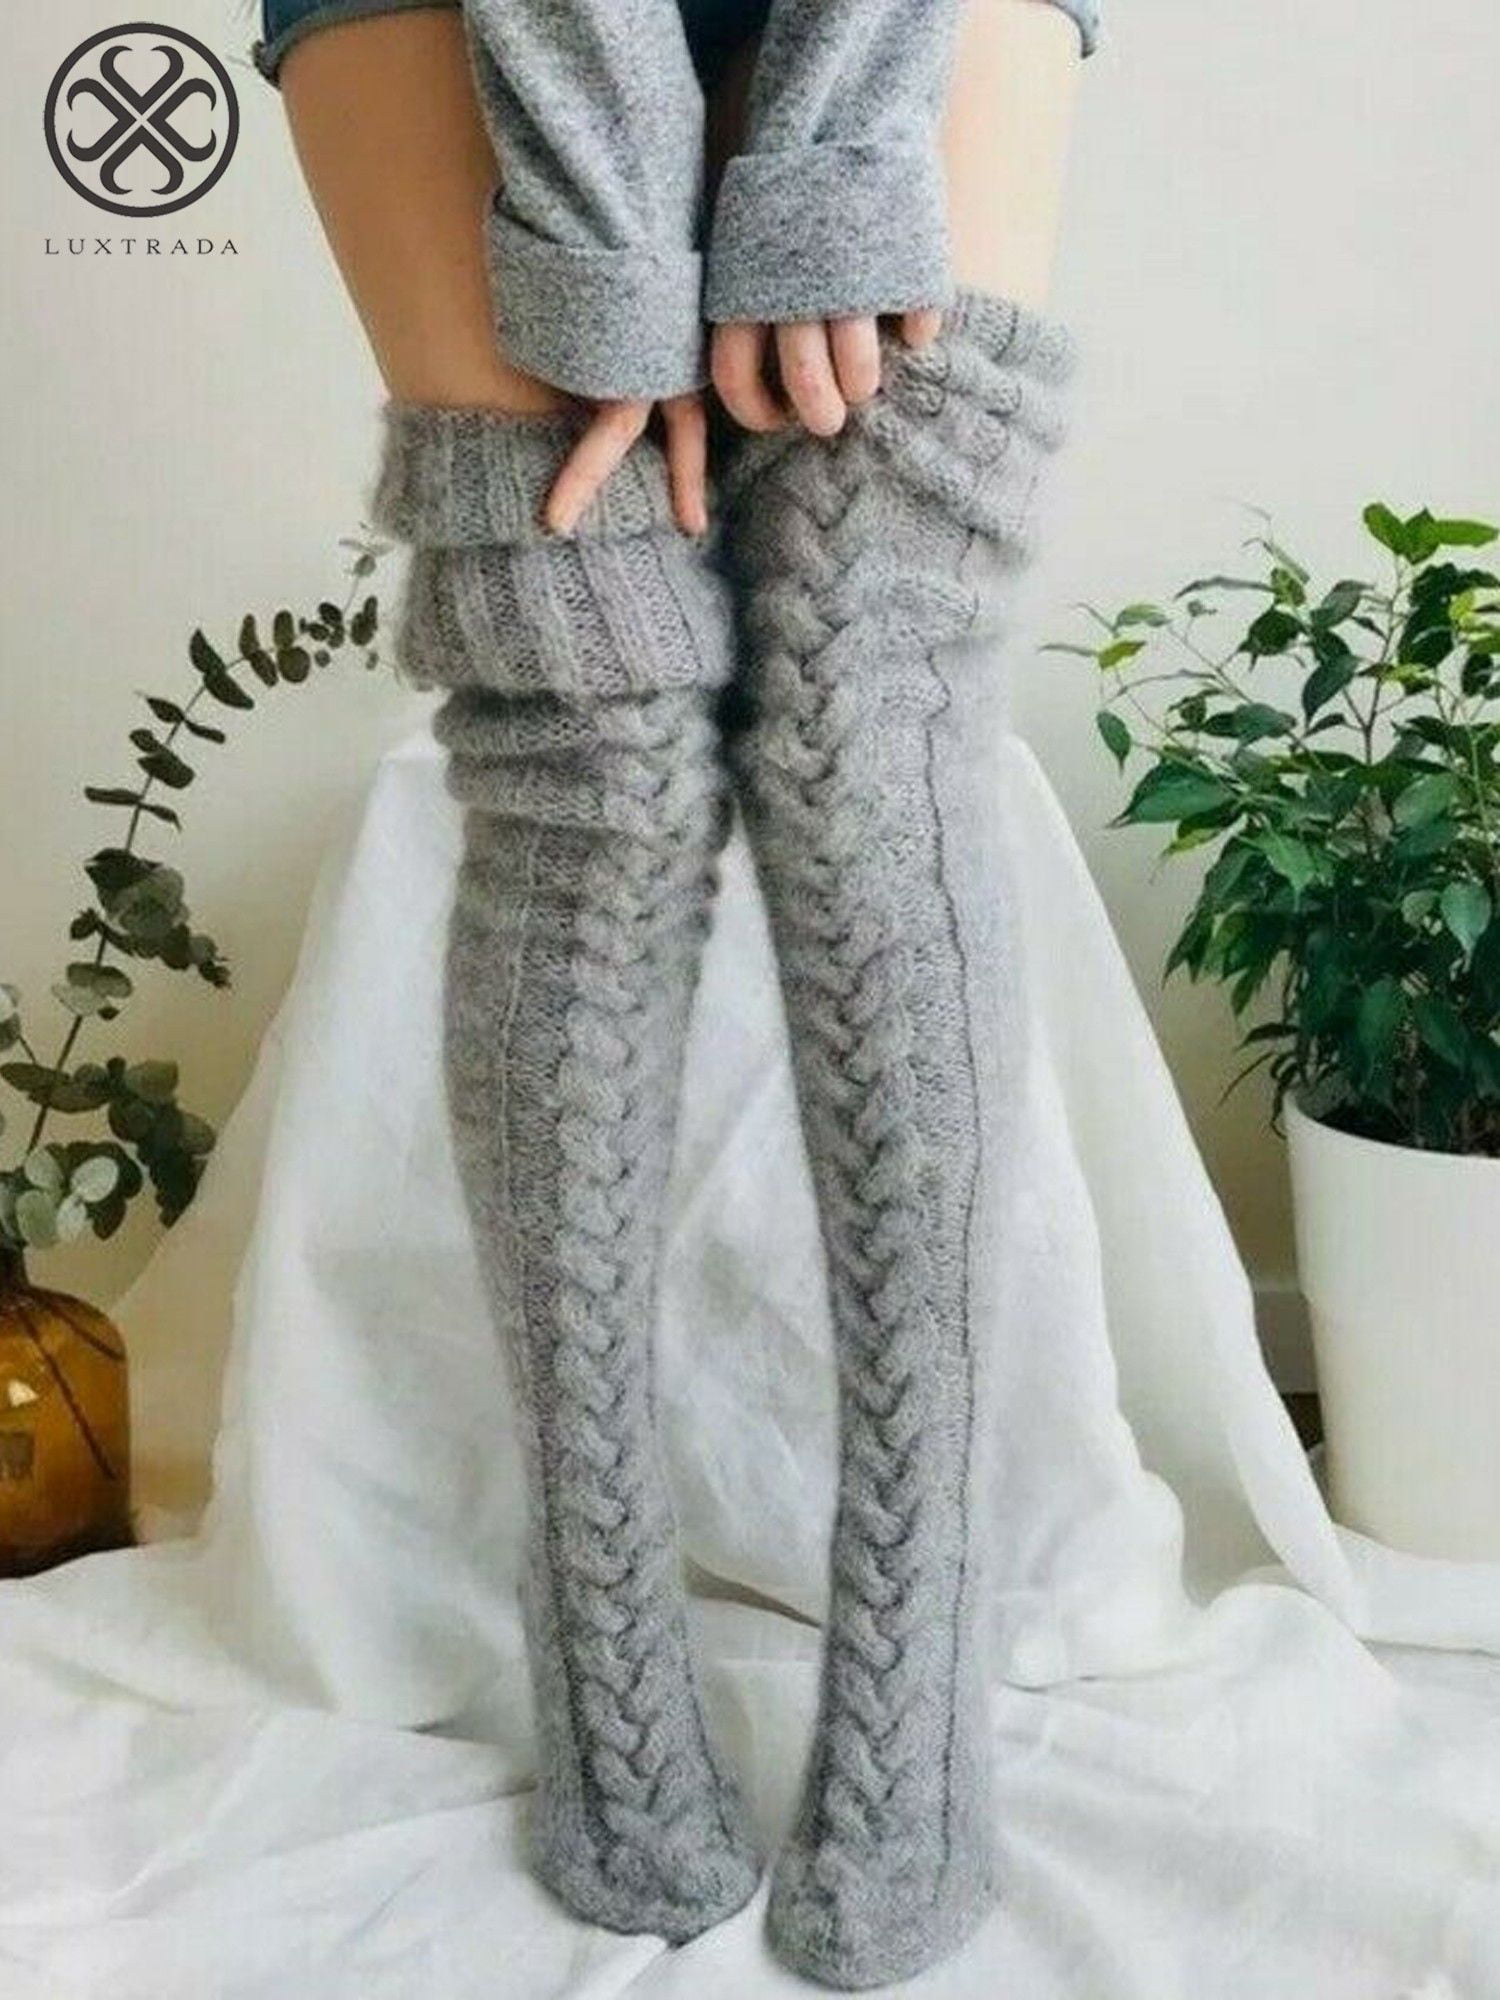 Details about   Sexy Lady Women Knit Thigh-High Over the Knee Socks Winter Long Stockings Warm